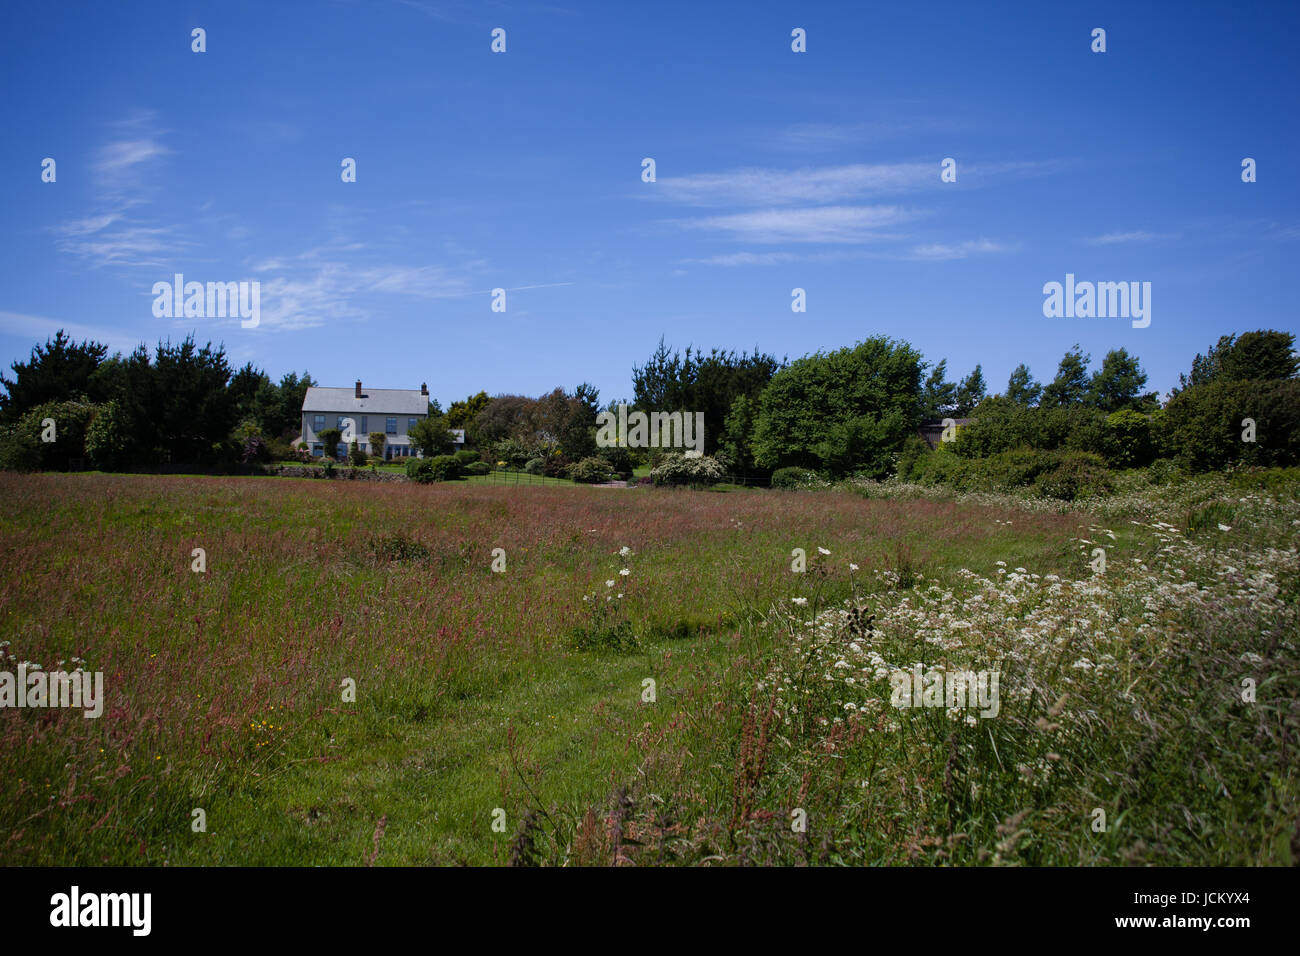 Country cottage viewed from across a summer meadow Stock Photo